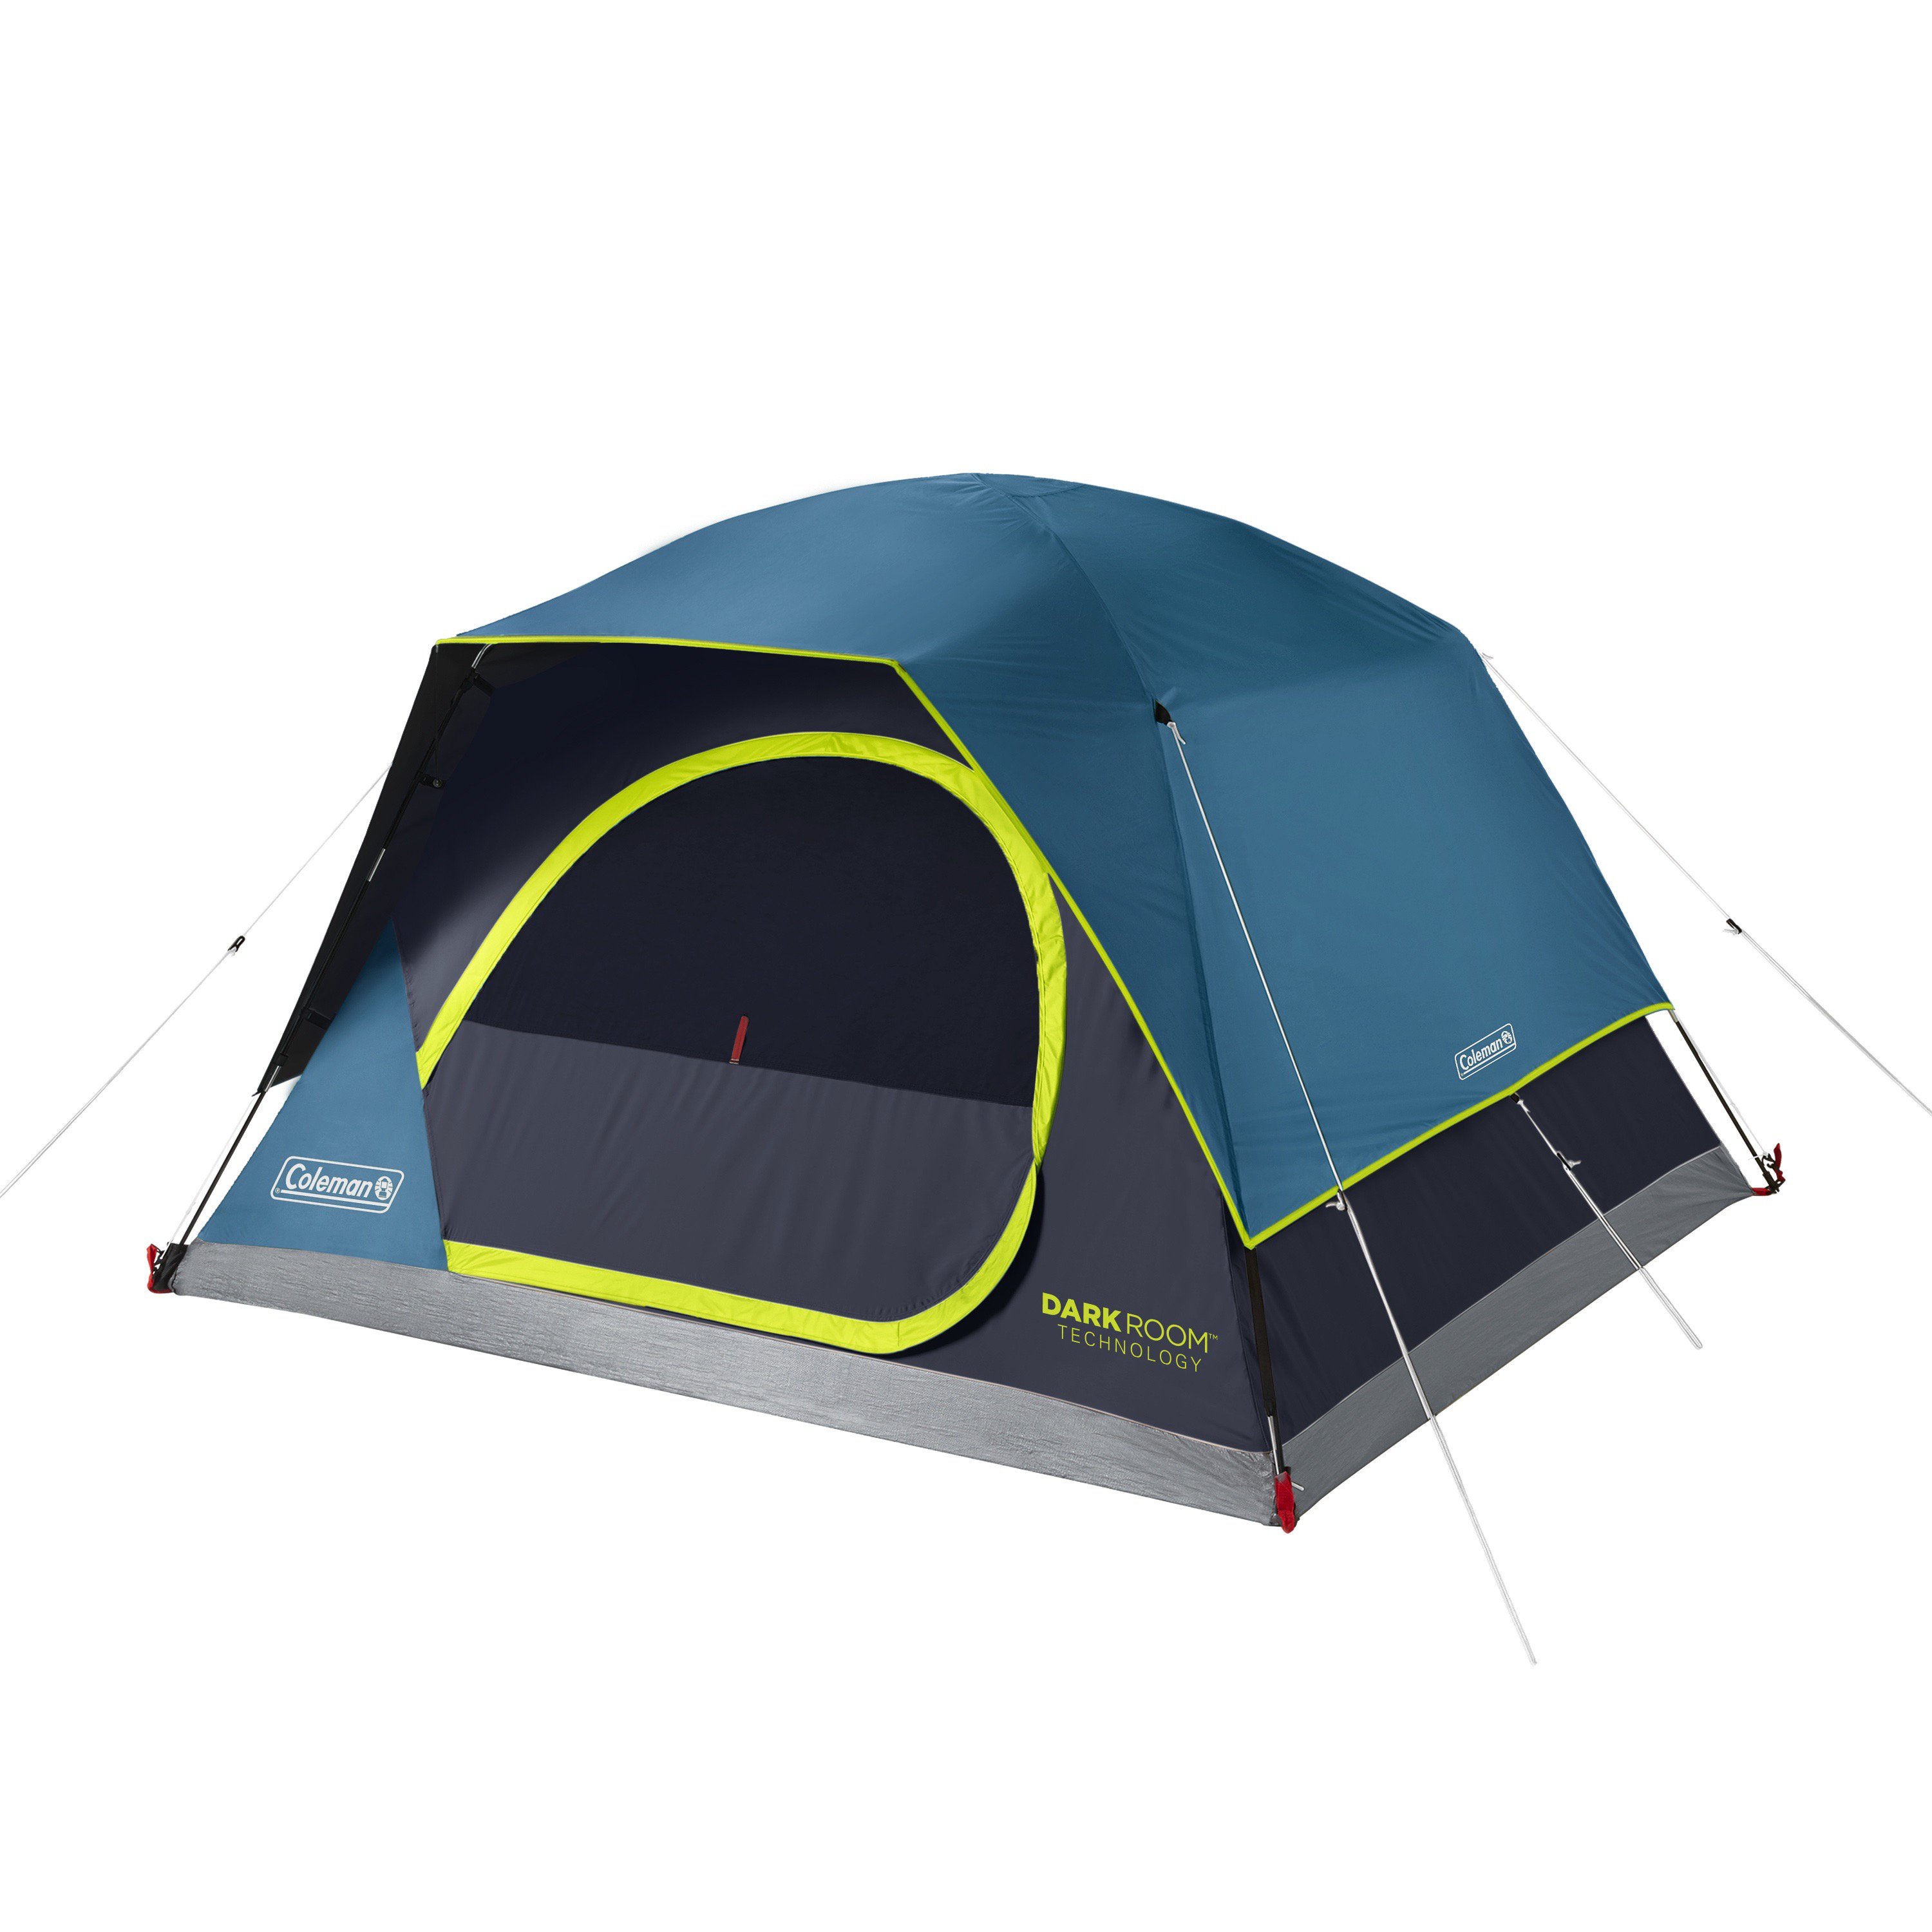 4-Person Dark Room™ Skydome™ Camping Tent | Coleman